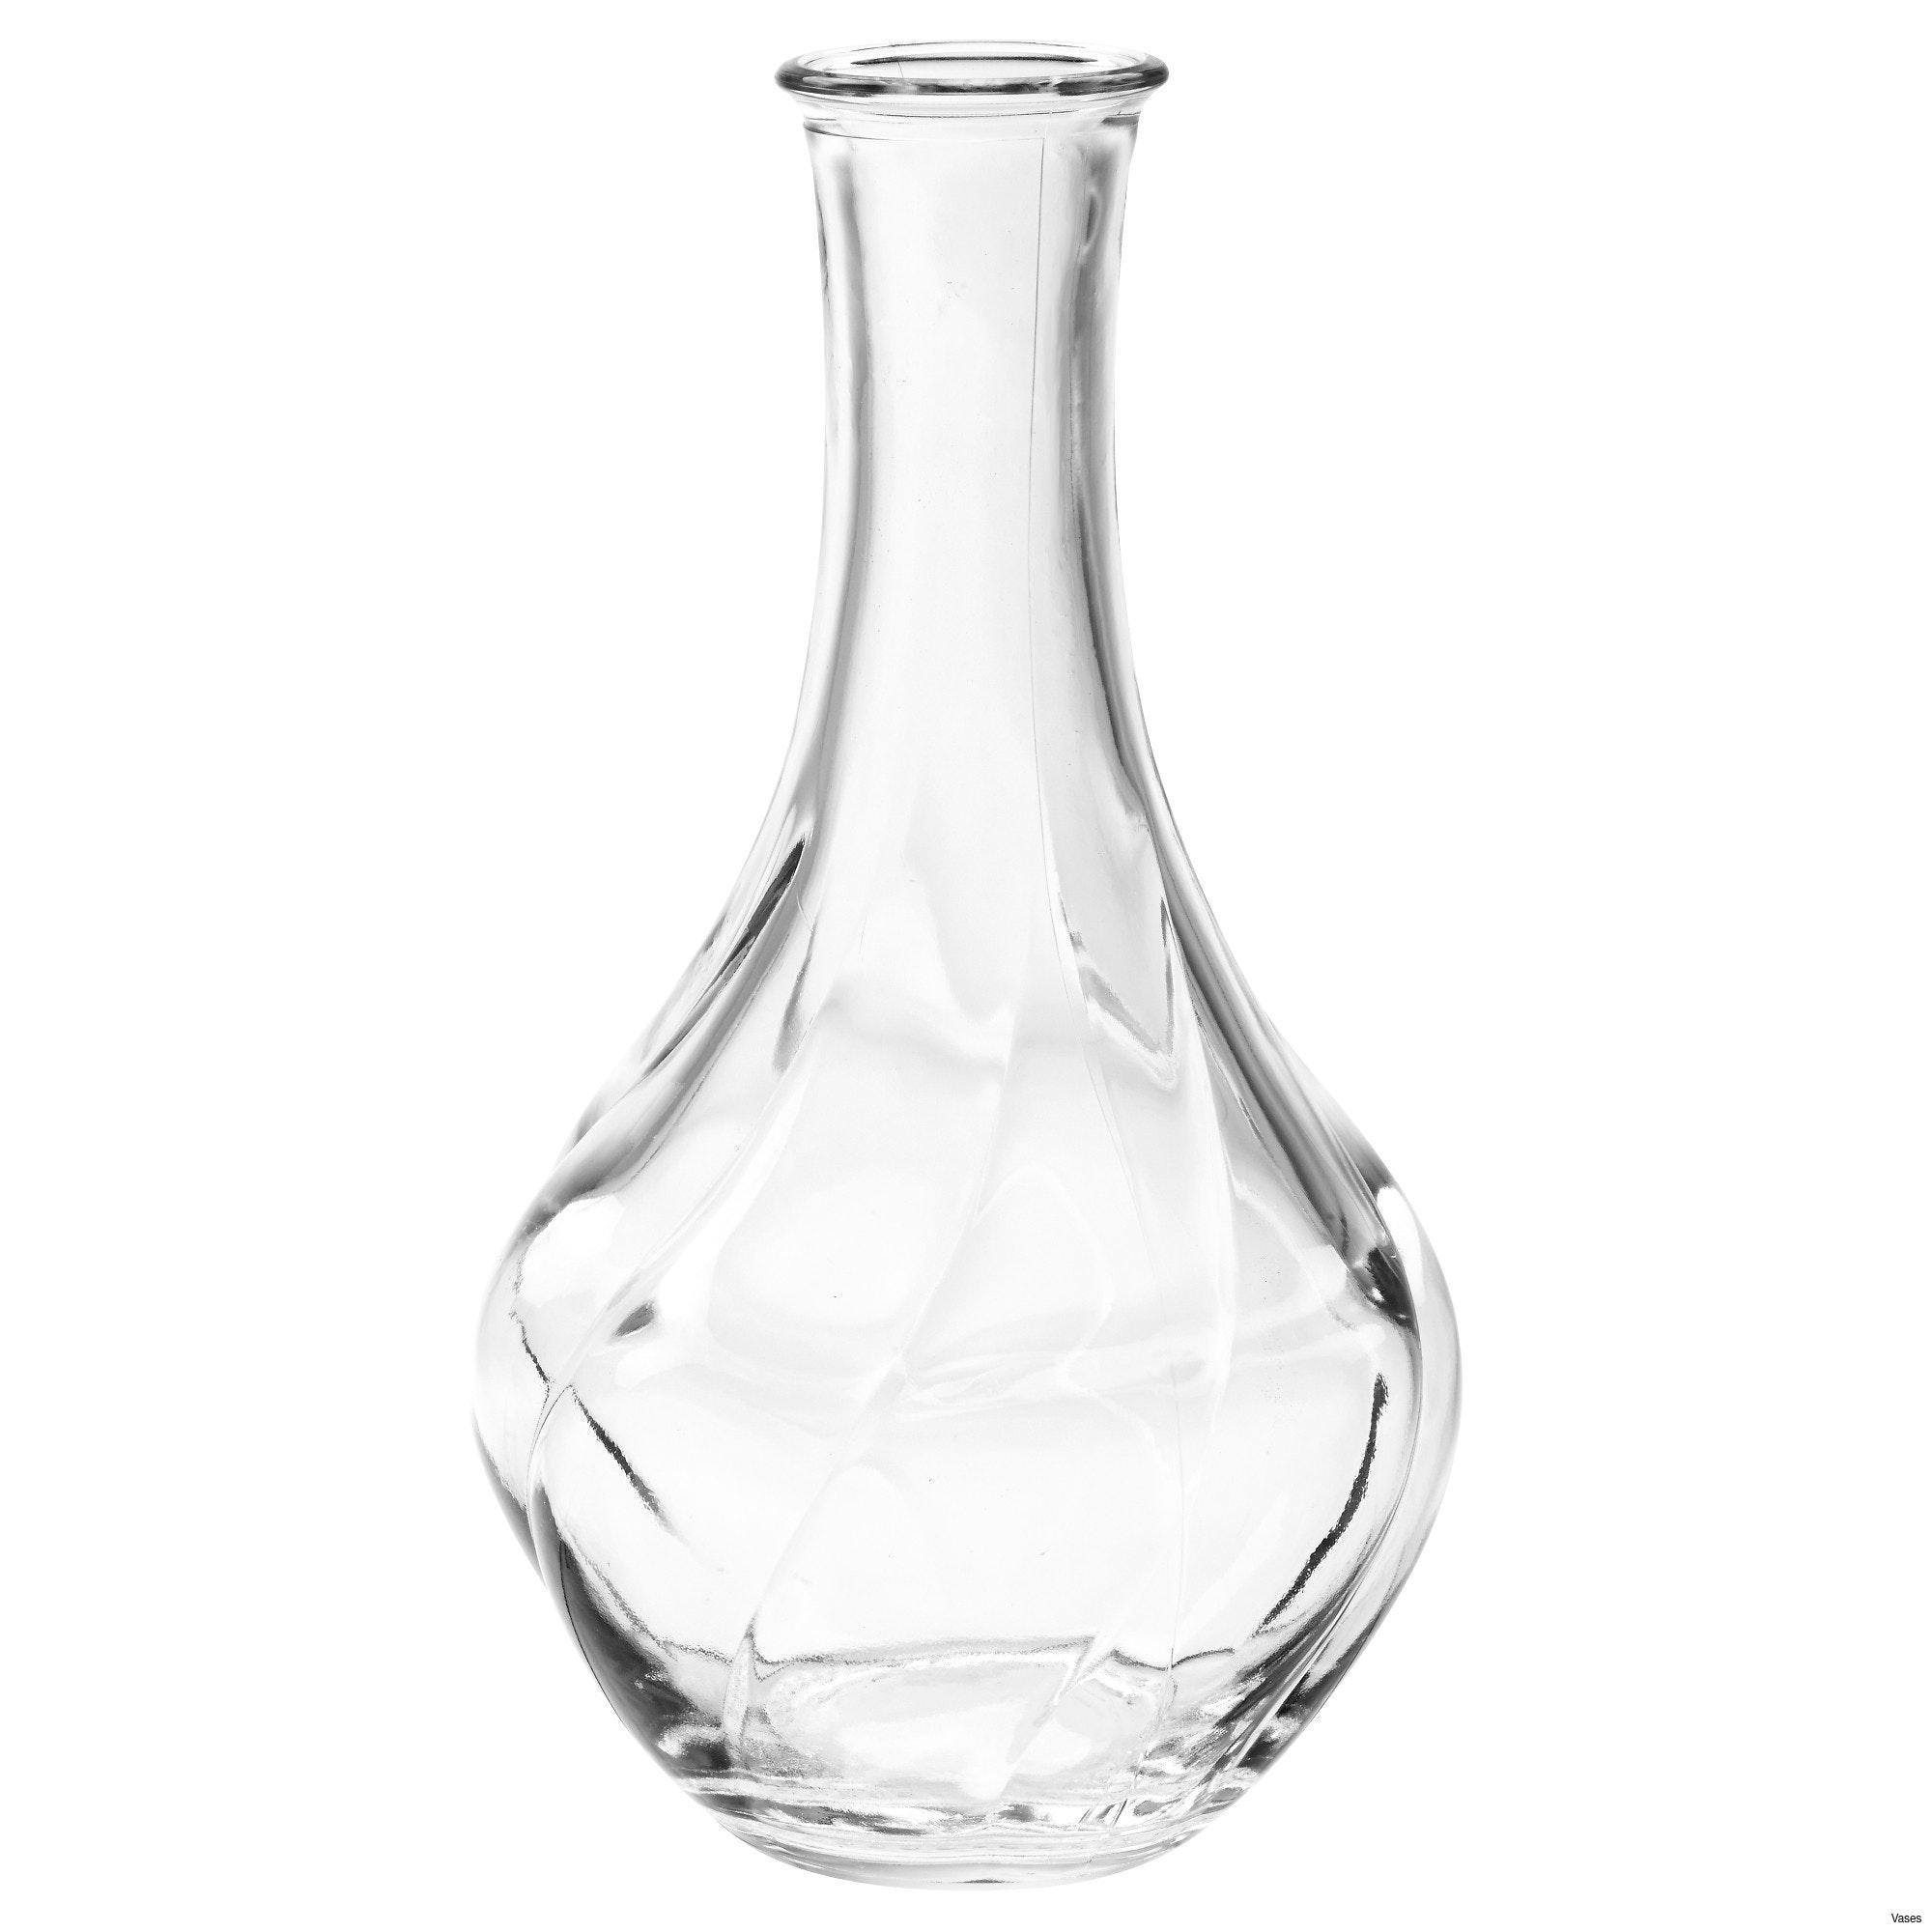 14 Fantastic wholesale Vase Fillers 2024 free download wholesale vase fillers of tall black vase images living room glass vases fresh clear vase 0d throughout living room glass vases fresh clear vase 0d tags amazing and